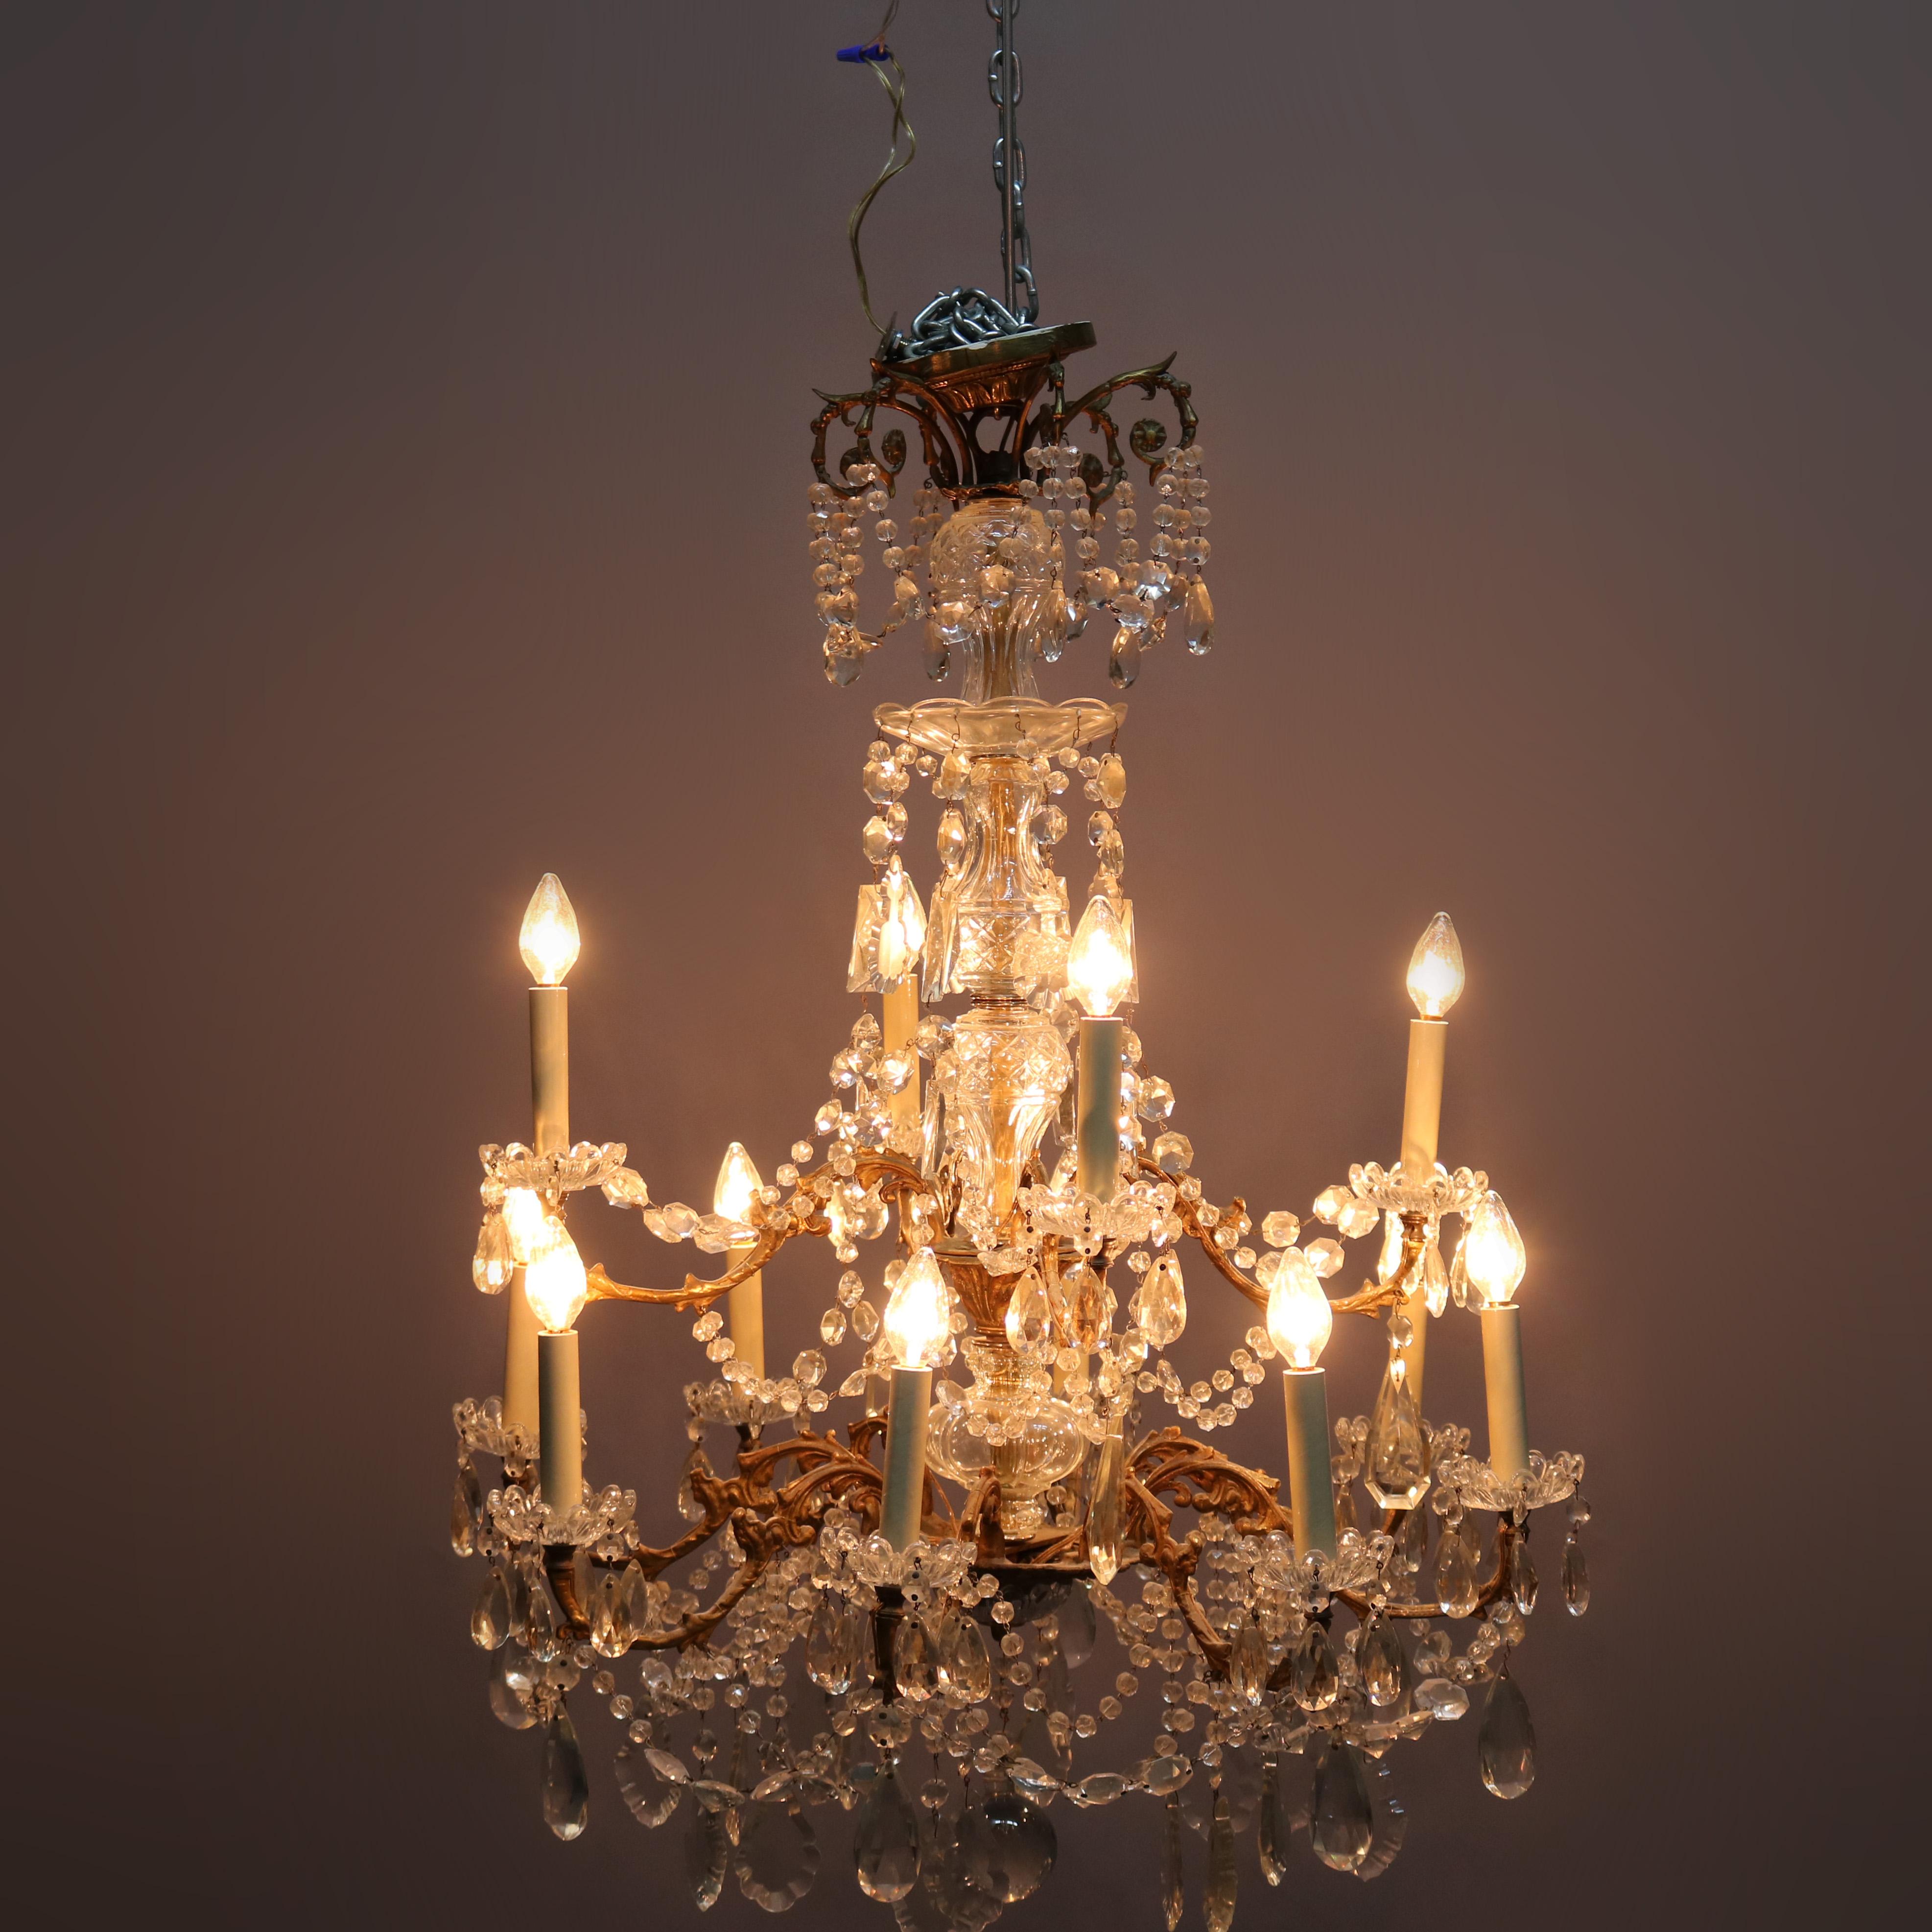 20th Century Antique French Bronze and Crystal Twelve-Light Chandelier, circa 1920